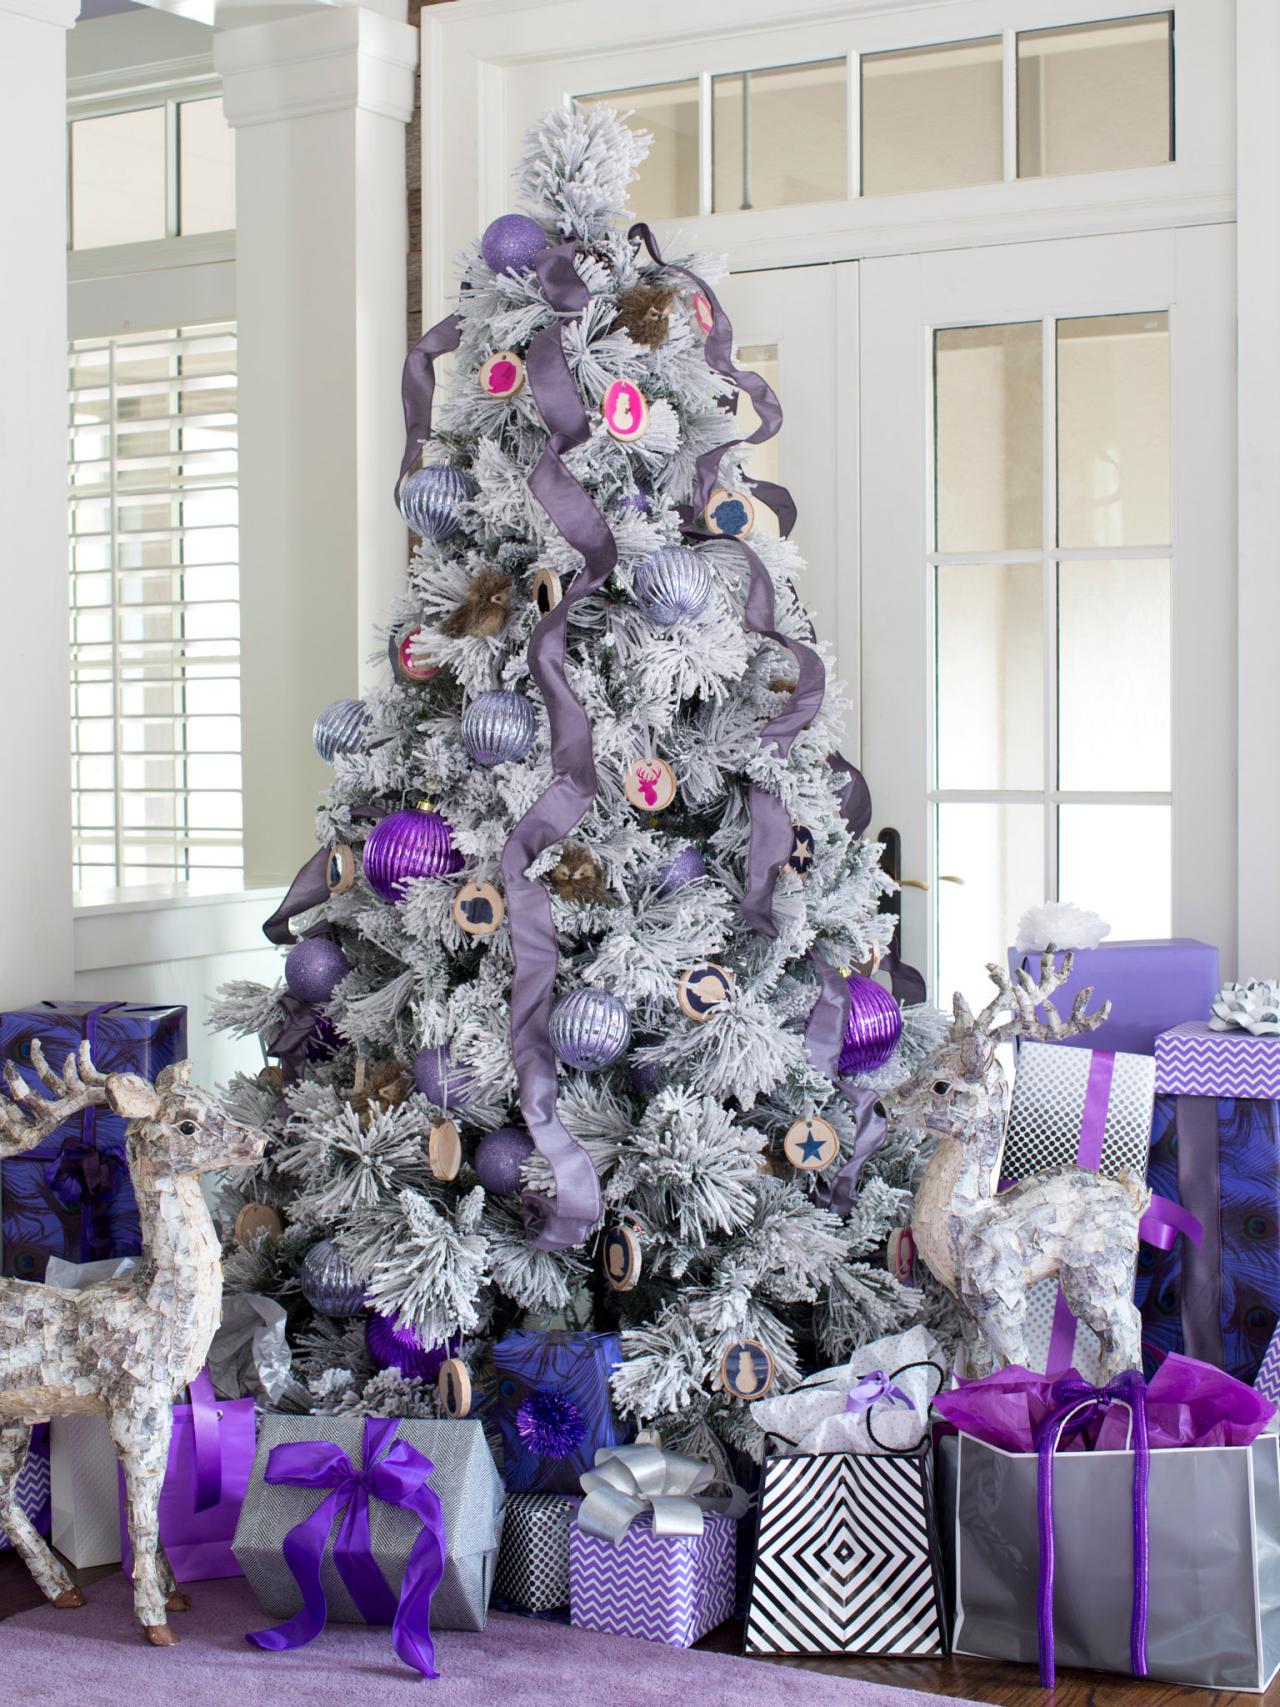 Non-Traditional Holiday Color Palettes | HGTV's Decorating ...
 Christmas Trees Decorated Purple